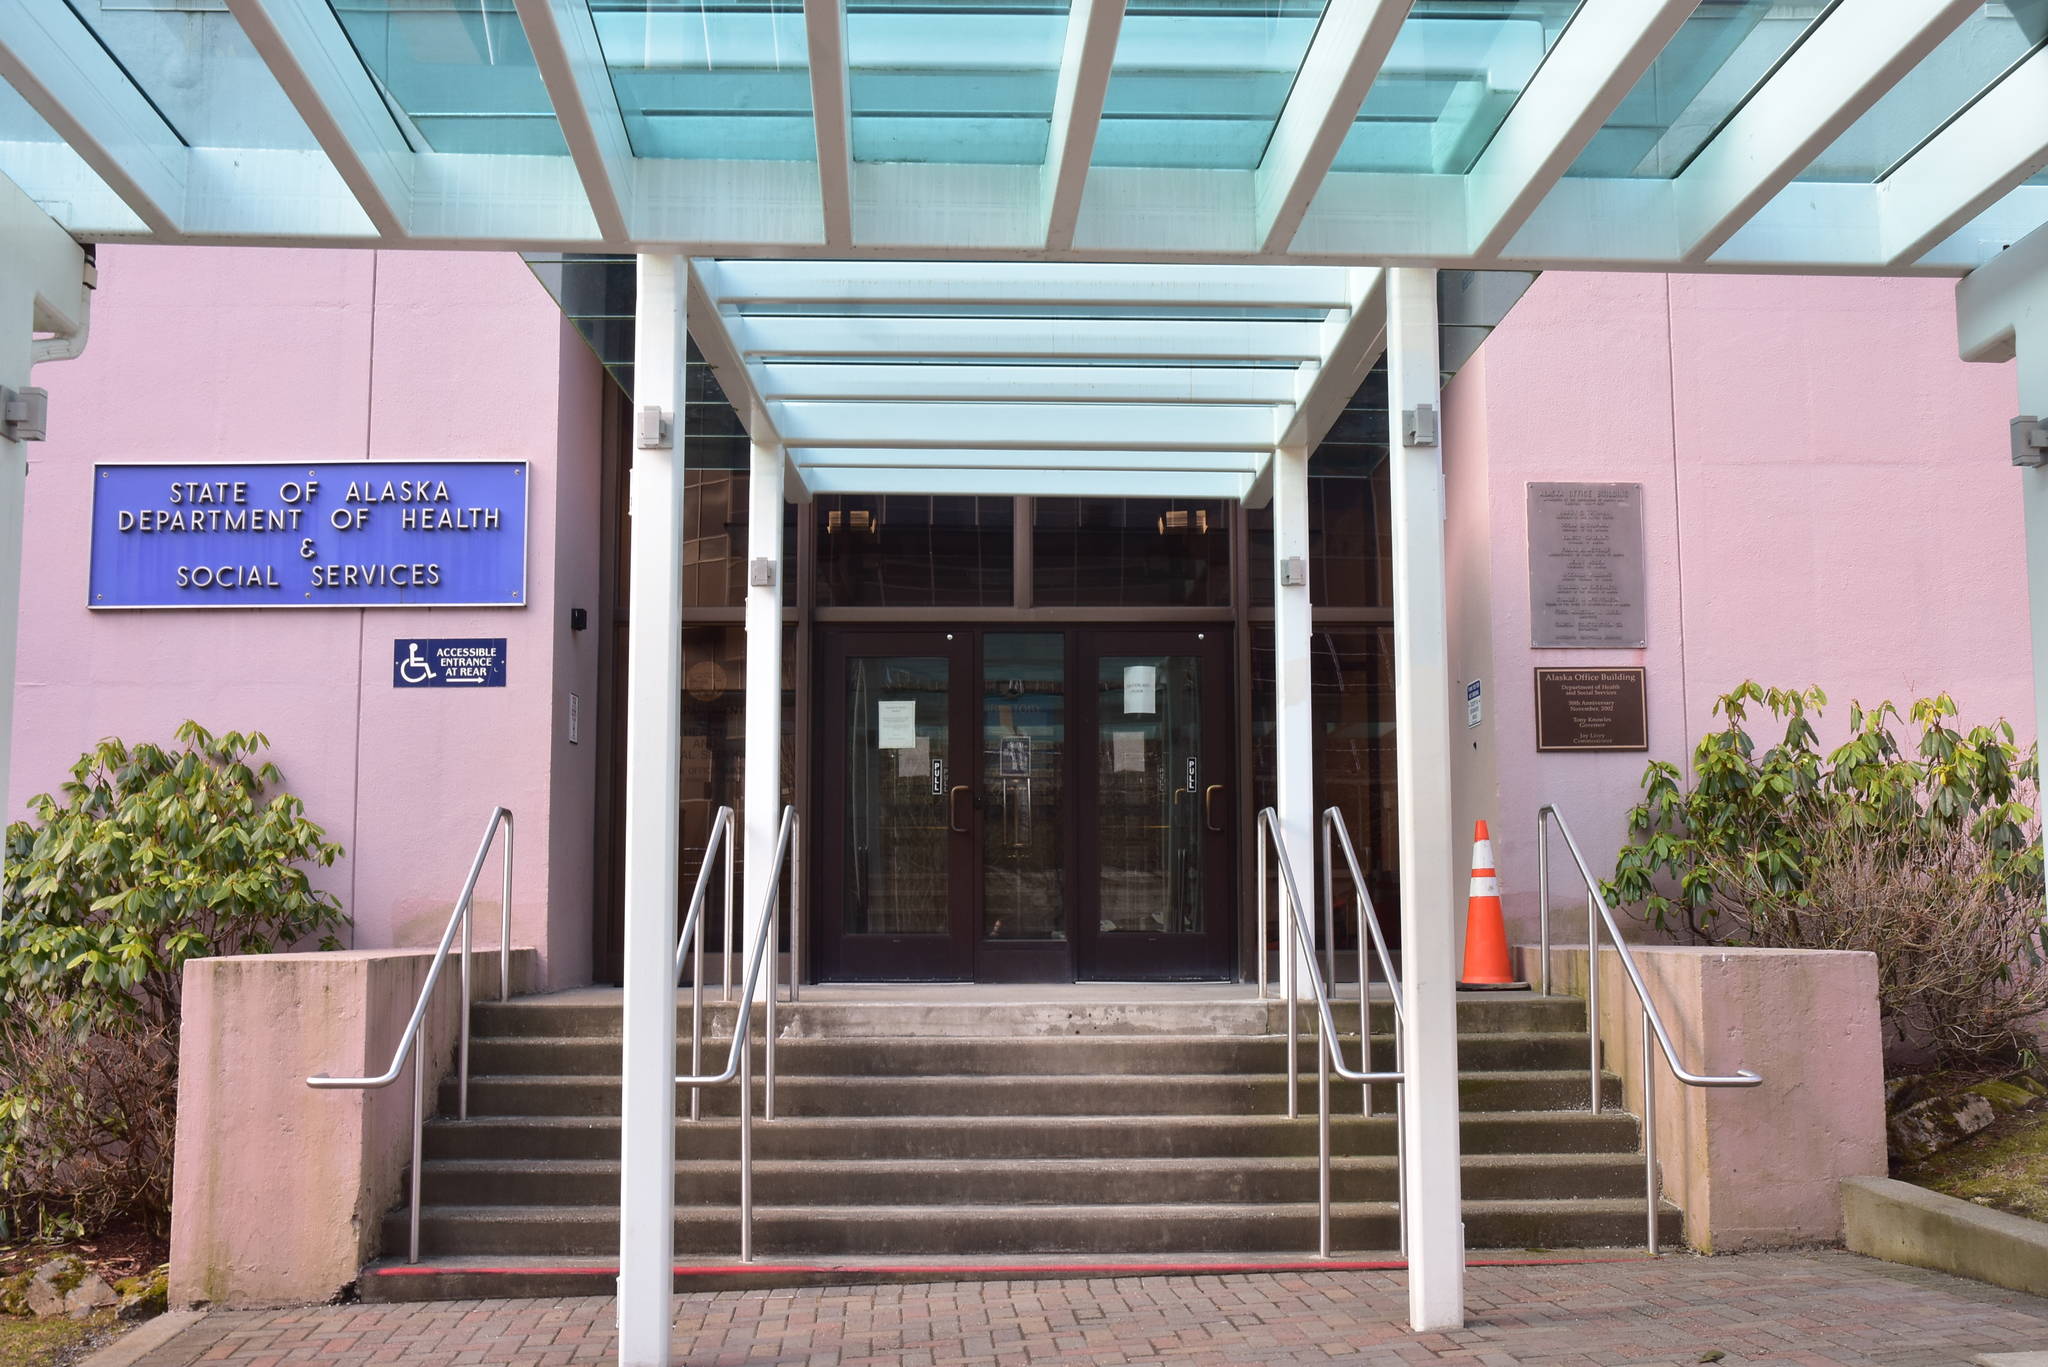 The Department of Health and Social Services, its headquarters seen here in Juneau on Monday, March 8, 2021, could be split into two departments by an executive order from the governor. However, some lawmakers have raised concern about the legality of the order, saying it could lead to costly litigation. (Peter Segall / Juneau Empire)